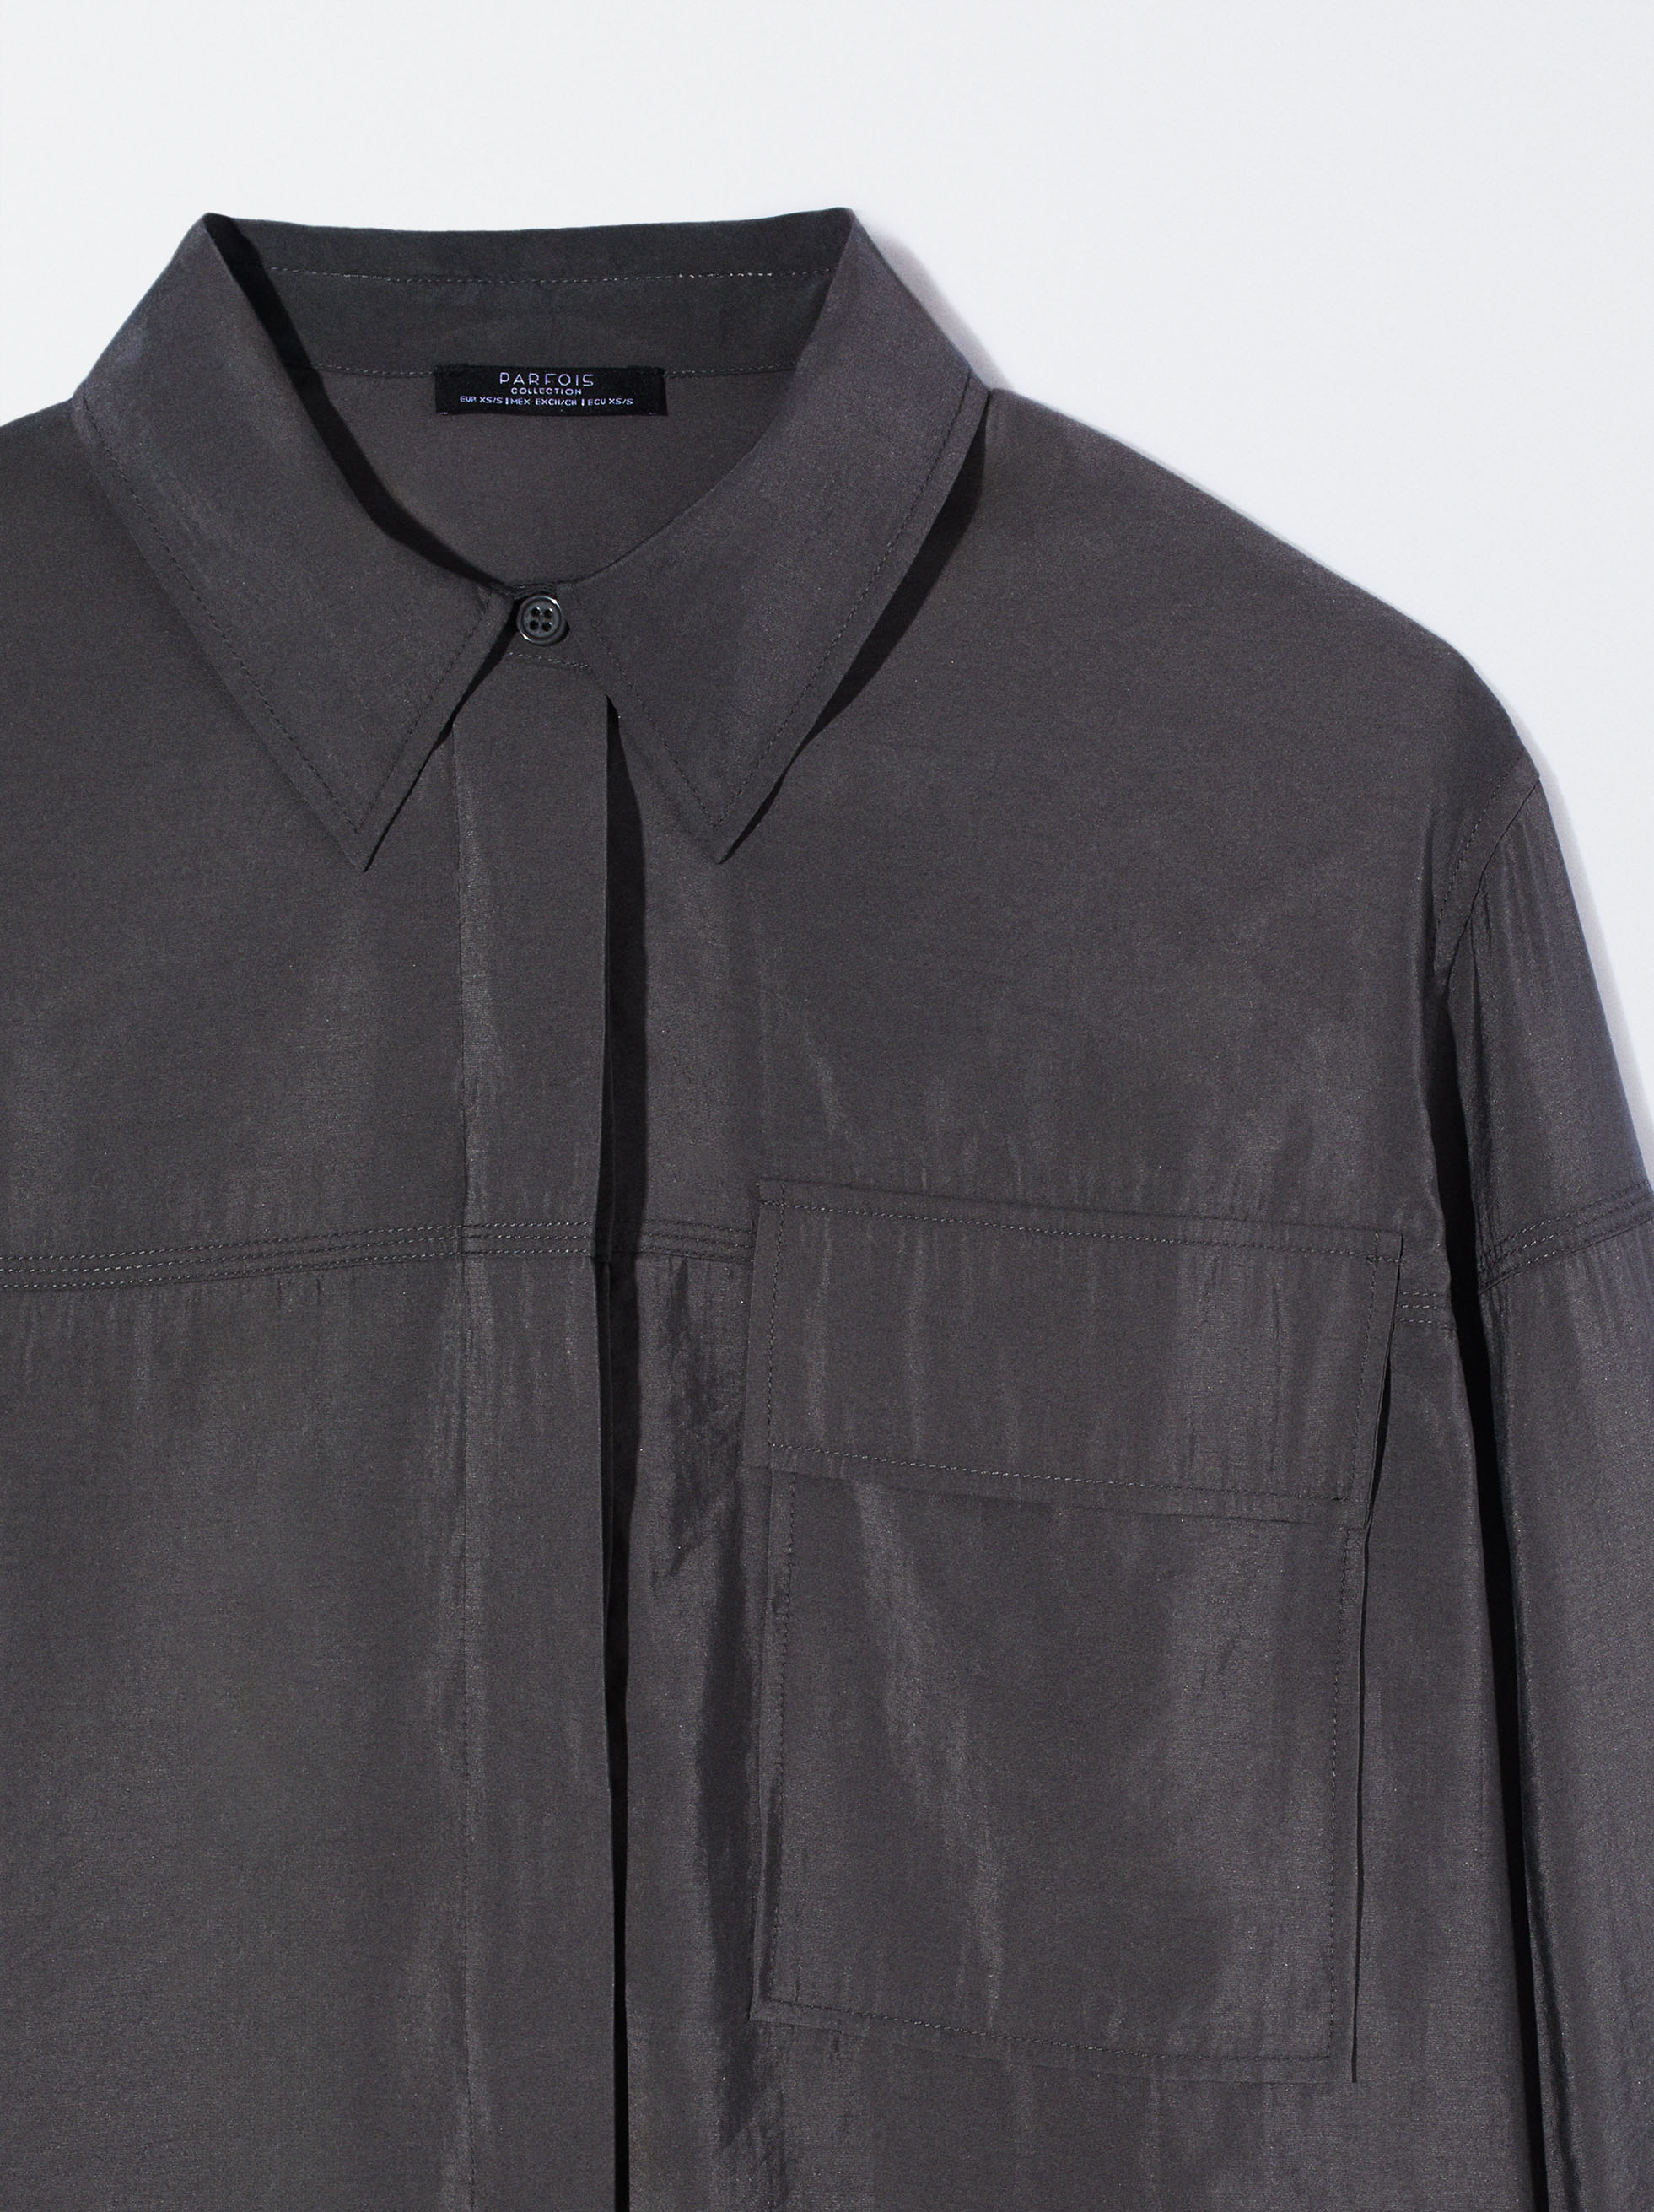 Online Exclusive - Long-Sleeve Shirt With Buttons image number 7.0